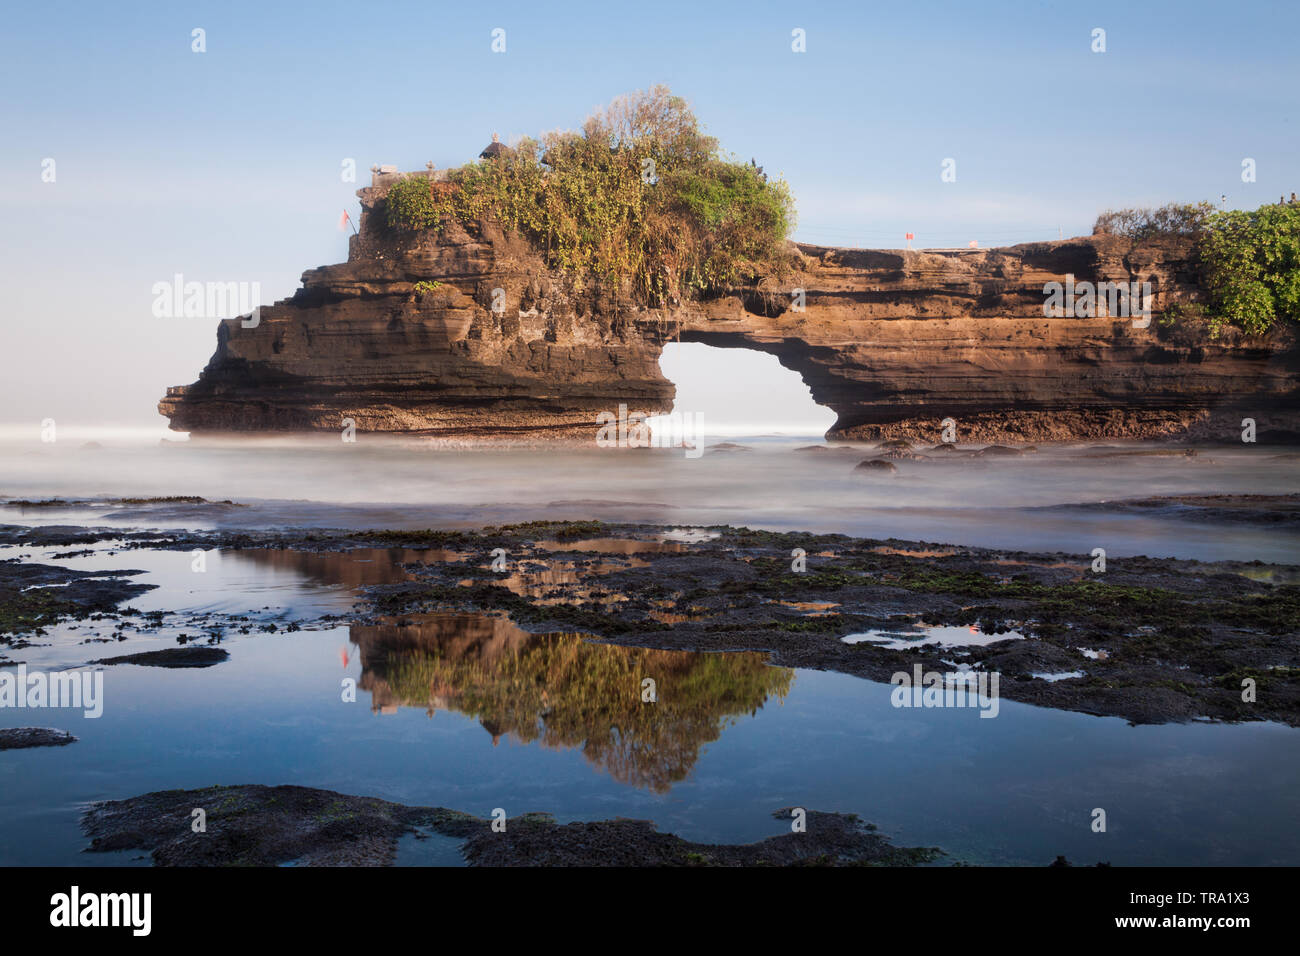 Stunning naturally weathered rock arch of Batu Bolong part of the World famous Tanah Lot rock Temple in Bali, Indonesia. Wide angle seascape image Stock Photo